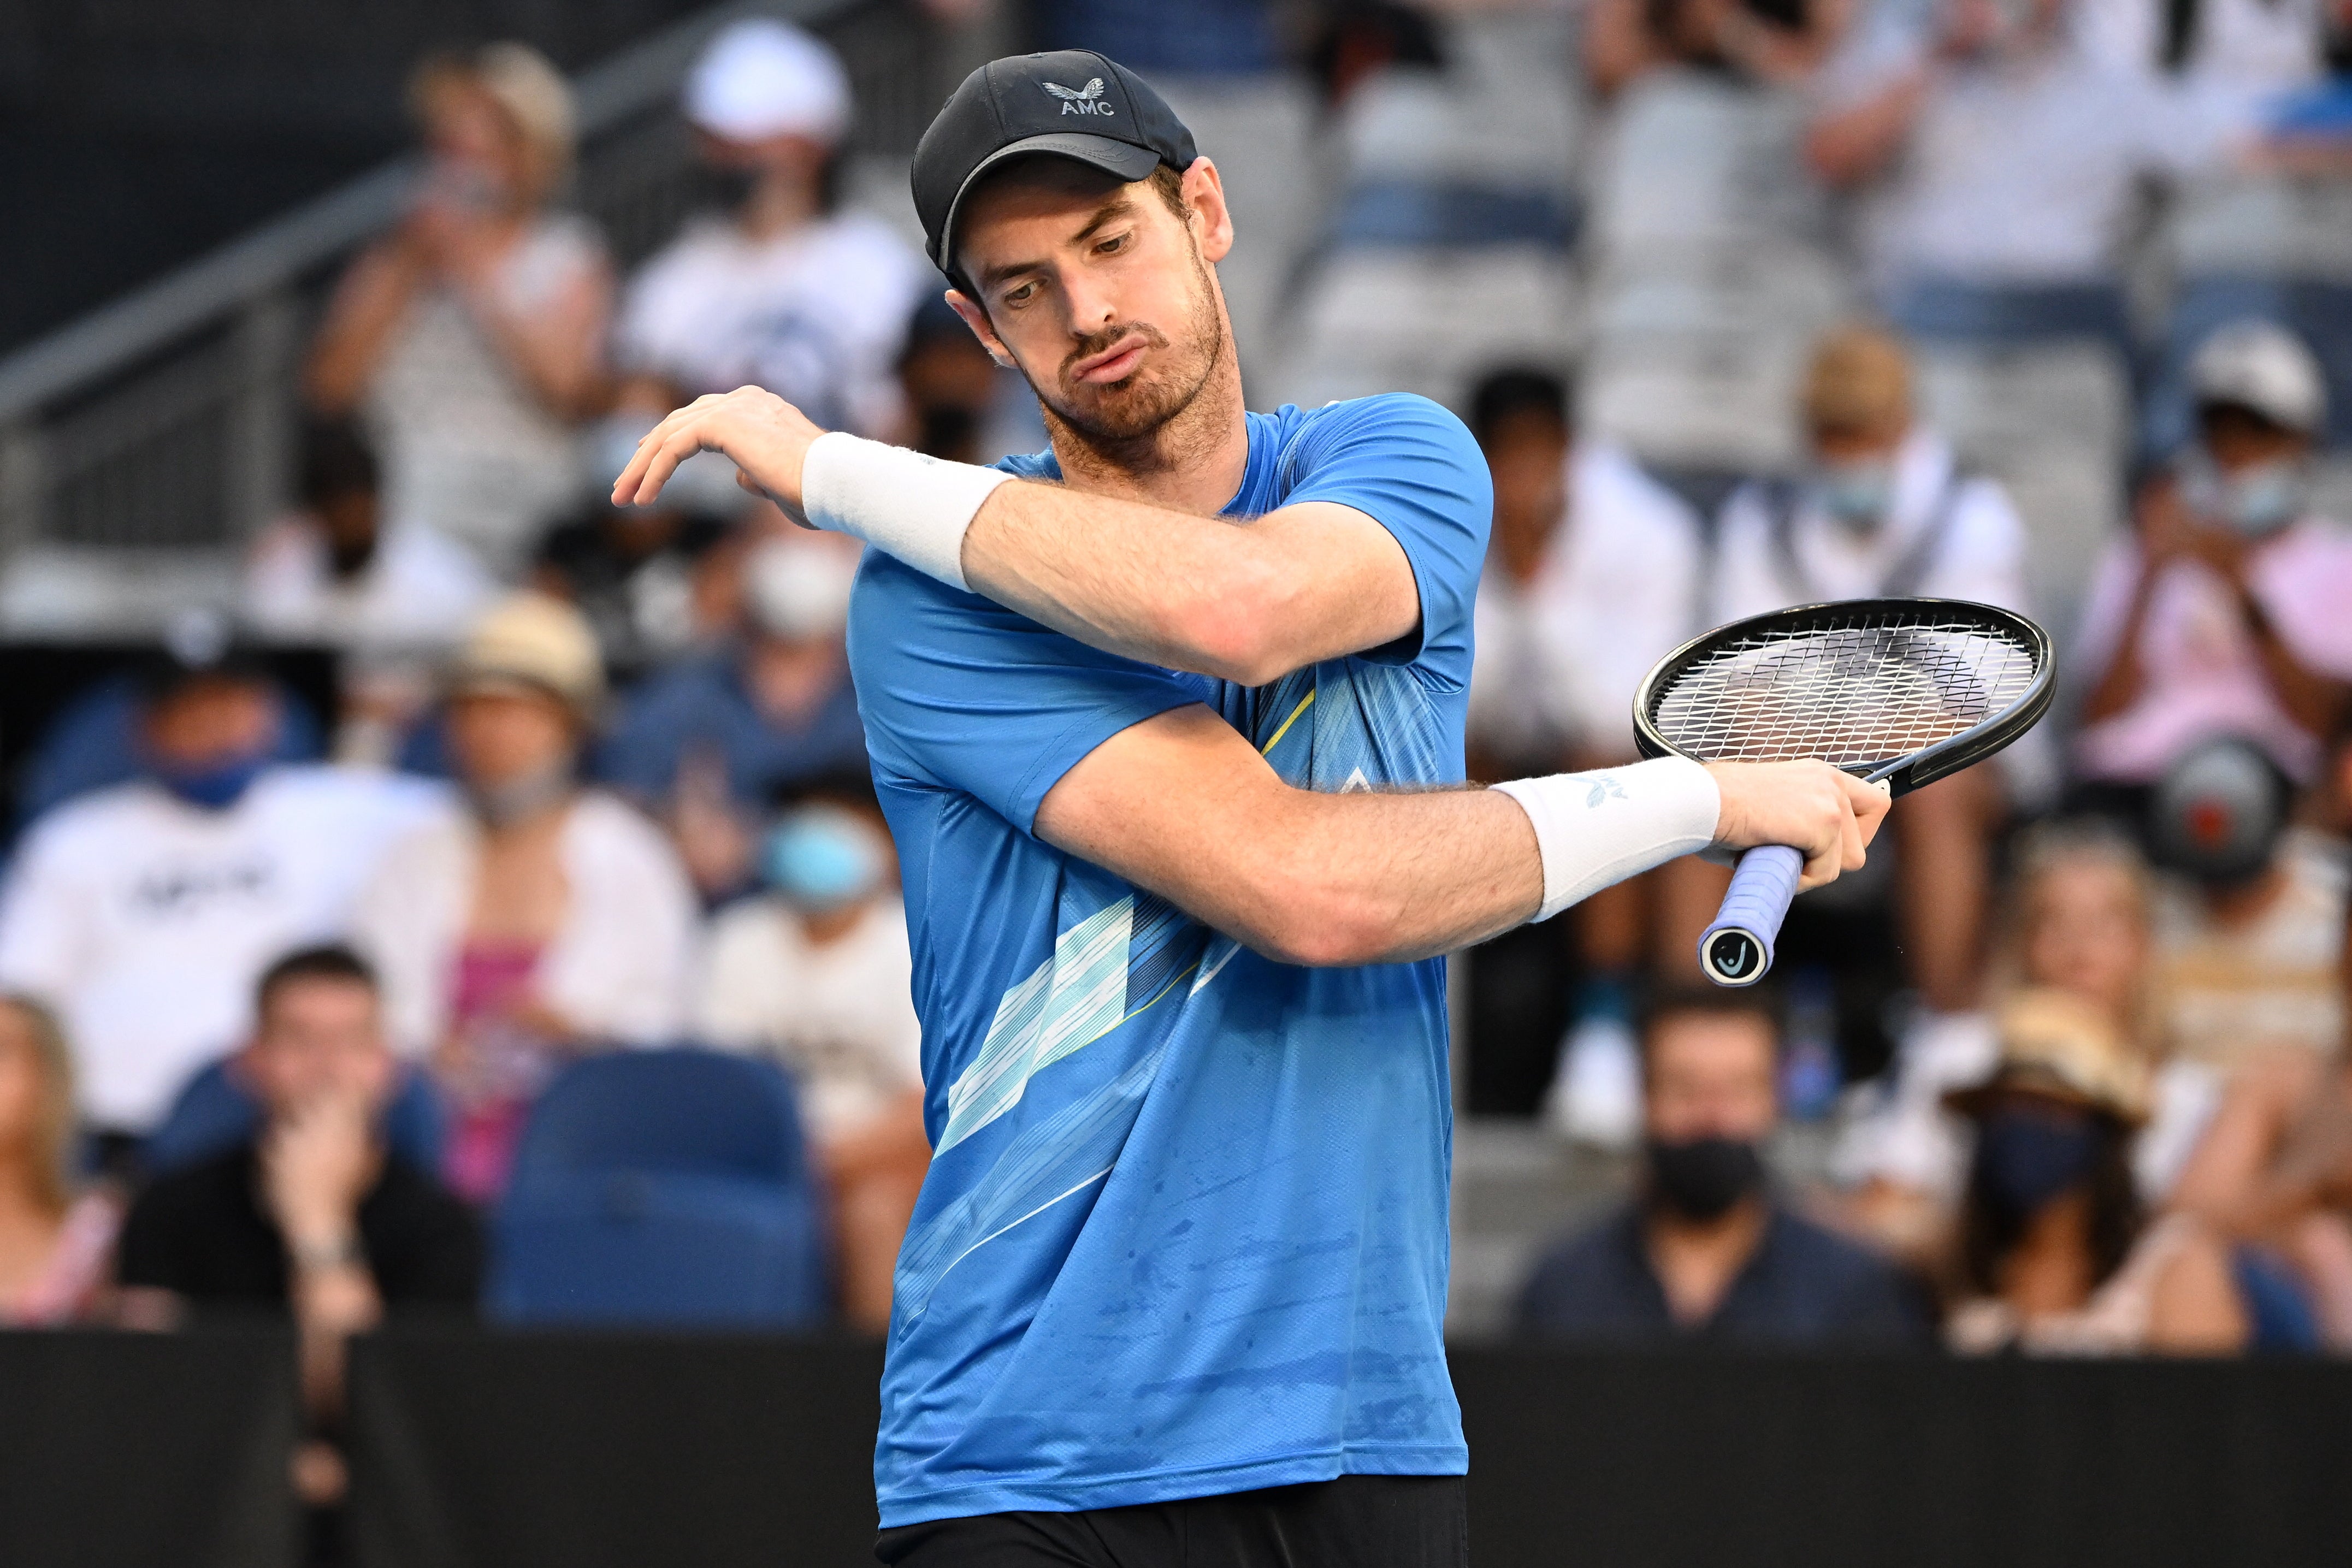 Andy Murray has yet to progress past the third round since returning to the grand slams